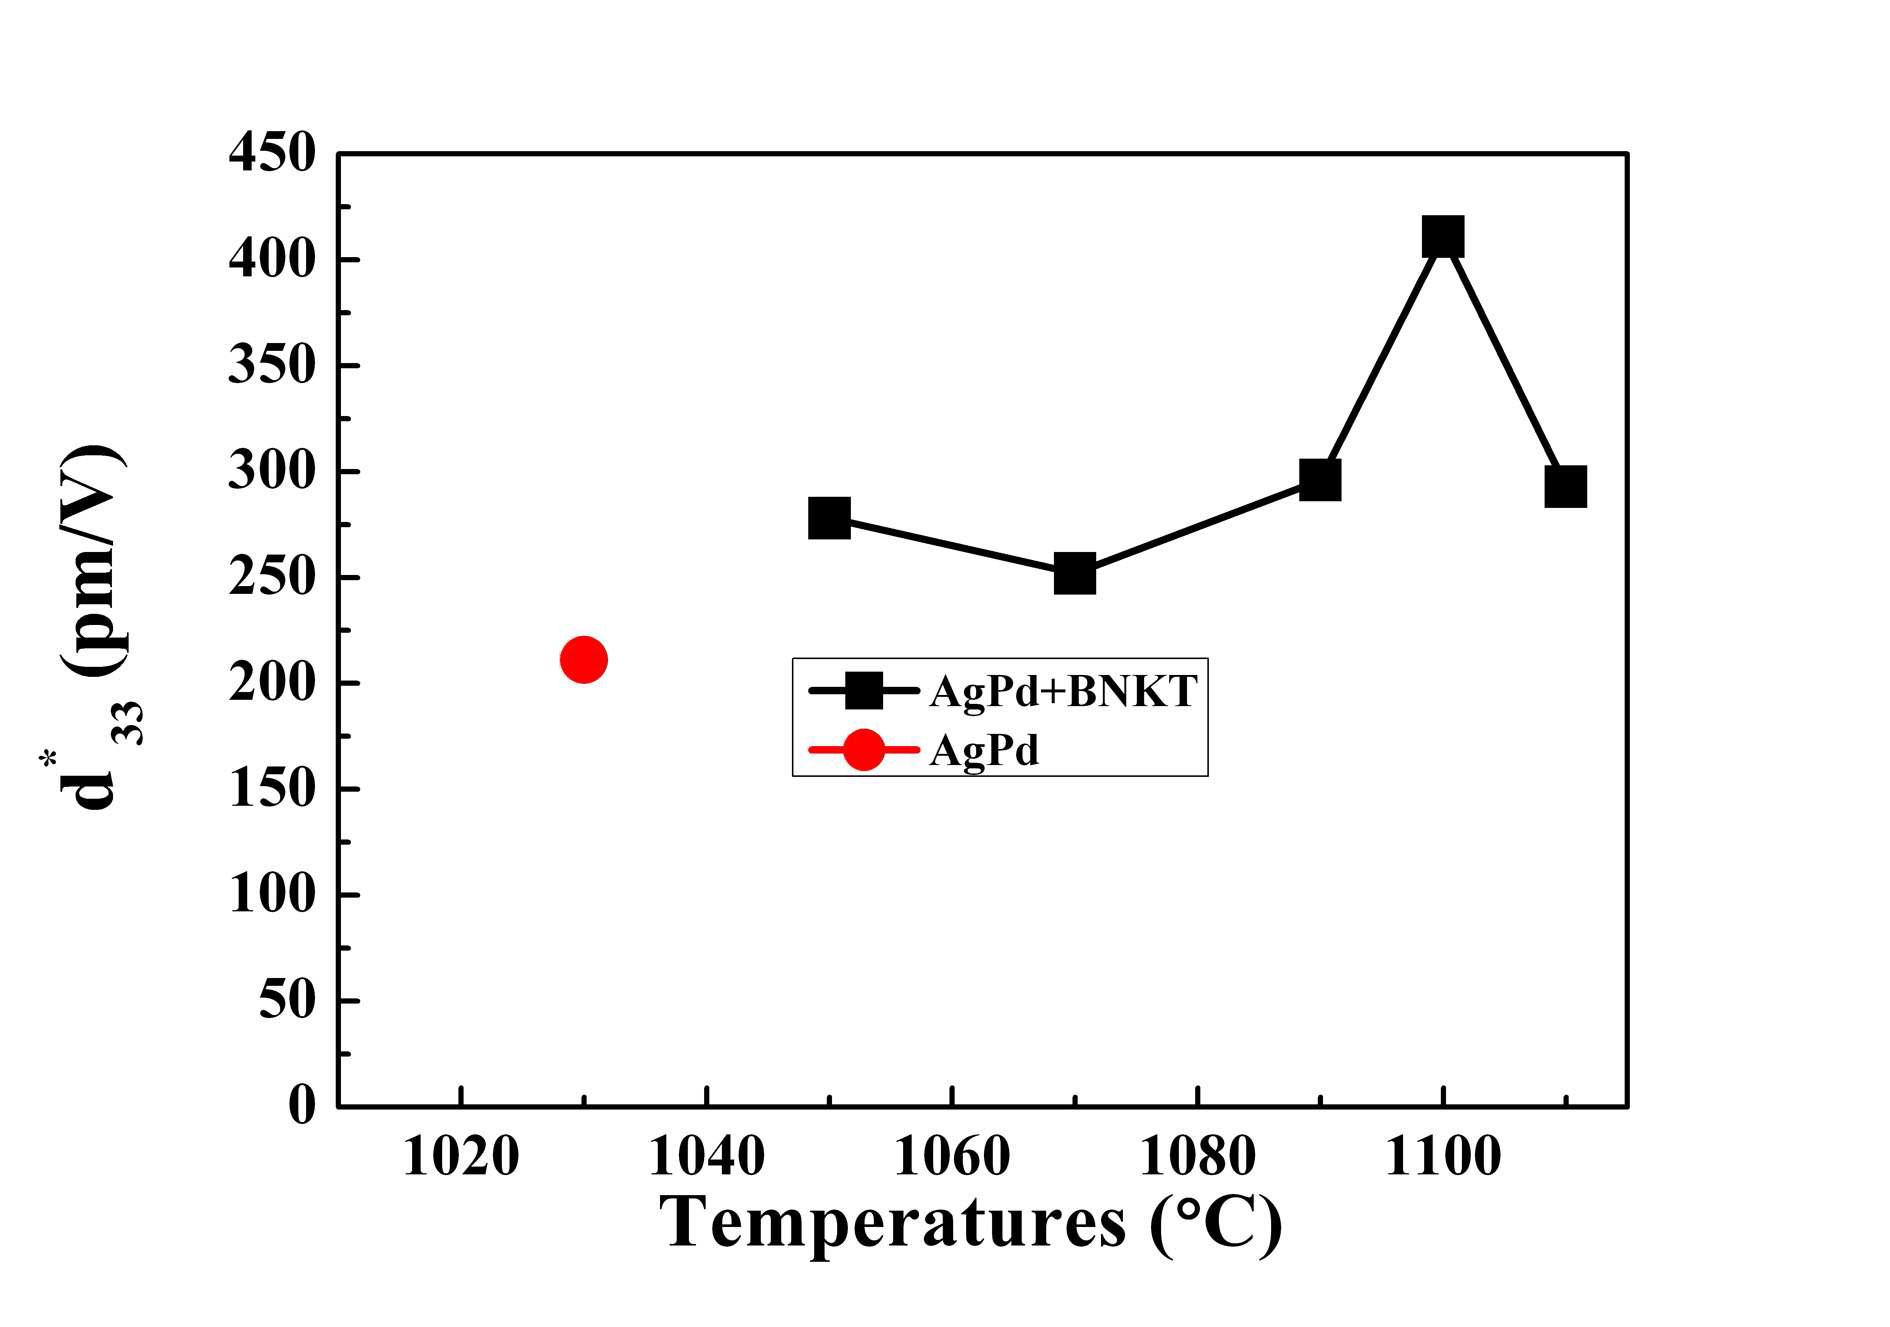 Large signal d33* (Smax/Emax) of BNKT MLA as a function of sintering temperature.